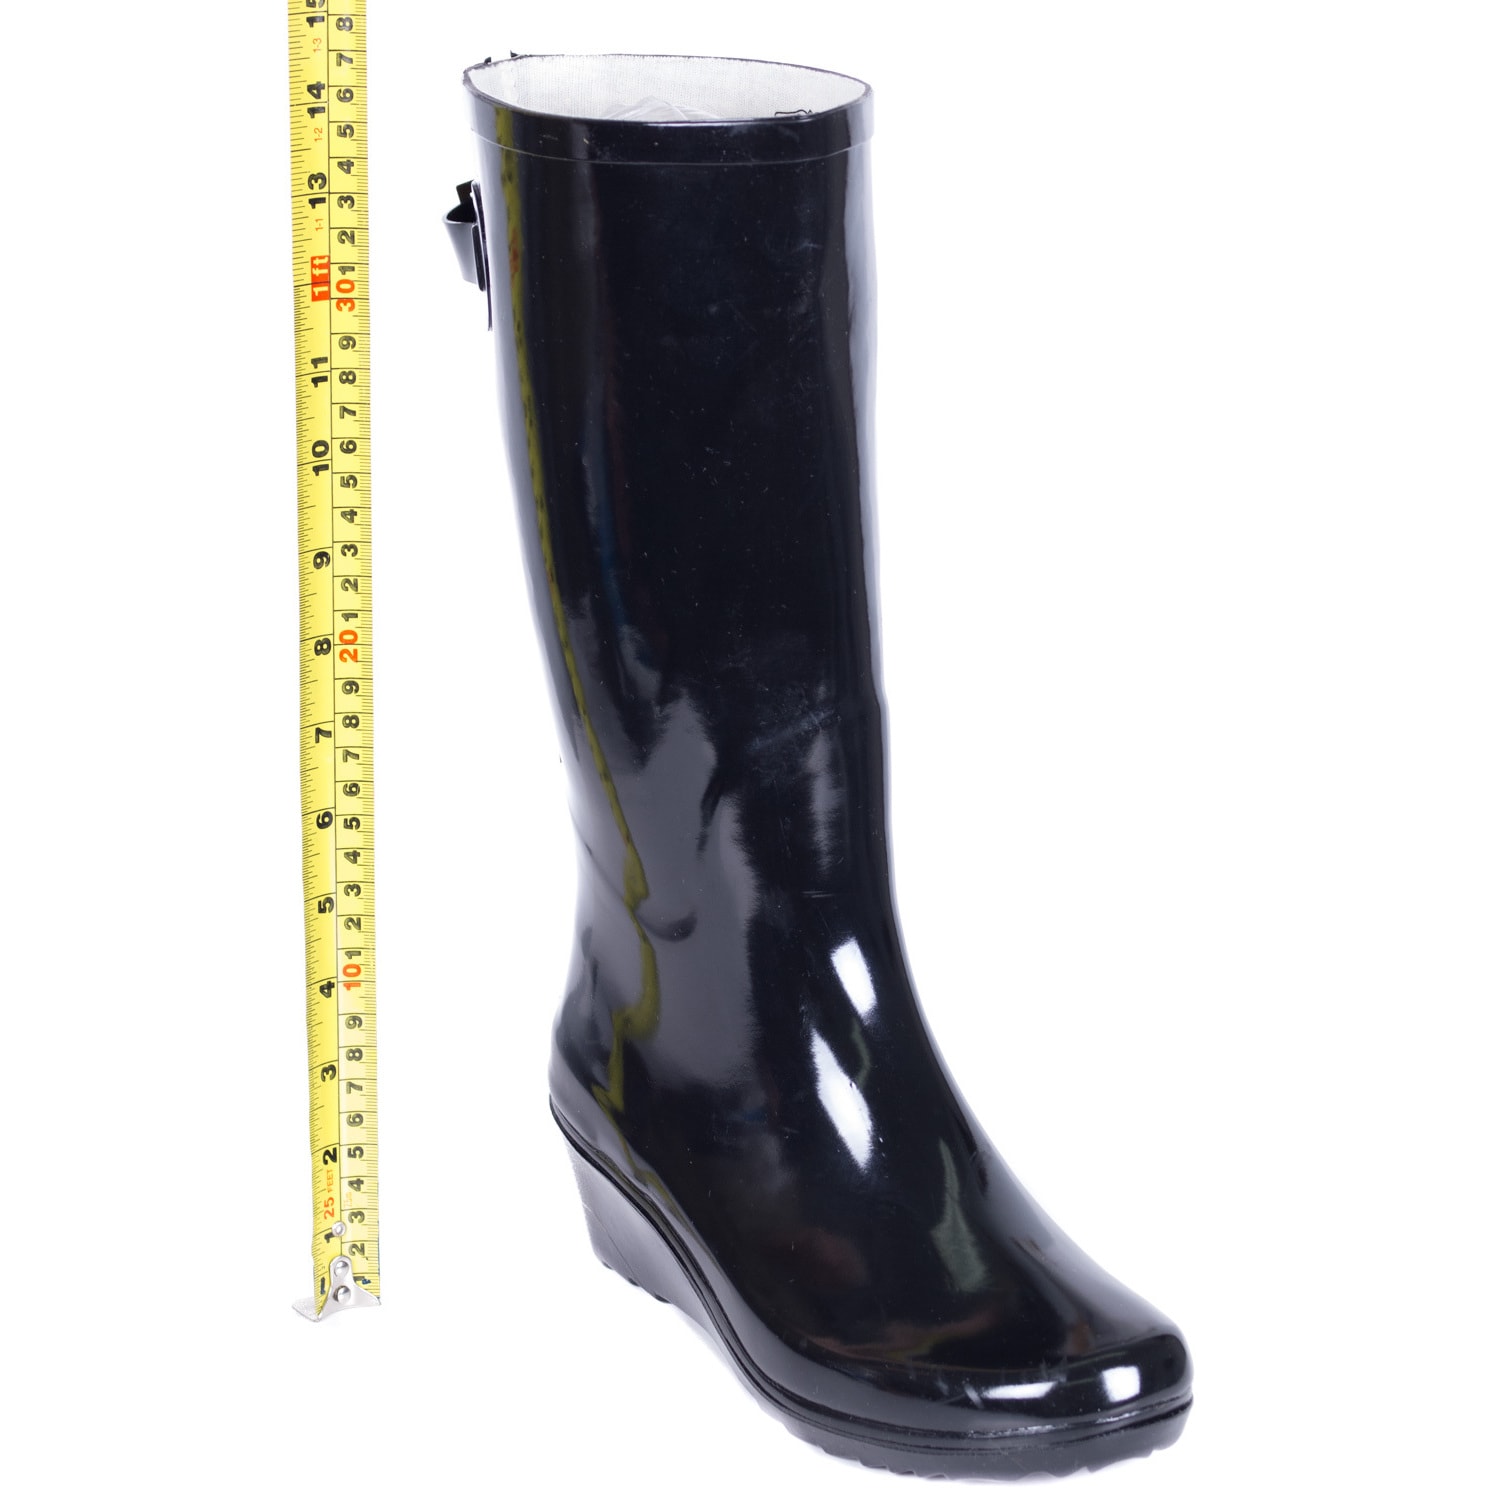 8 inch rubber boots